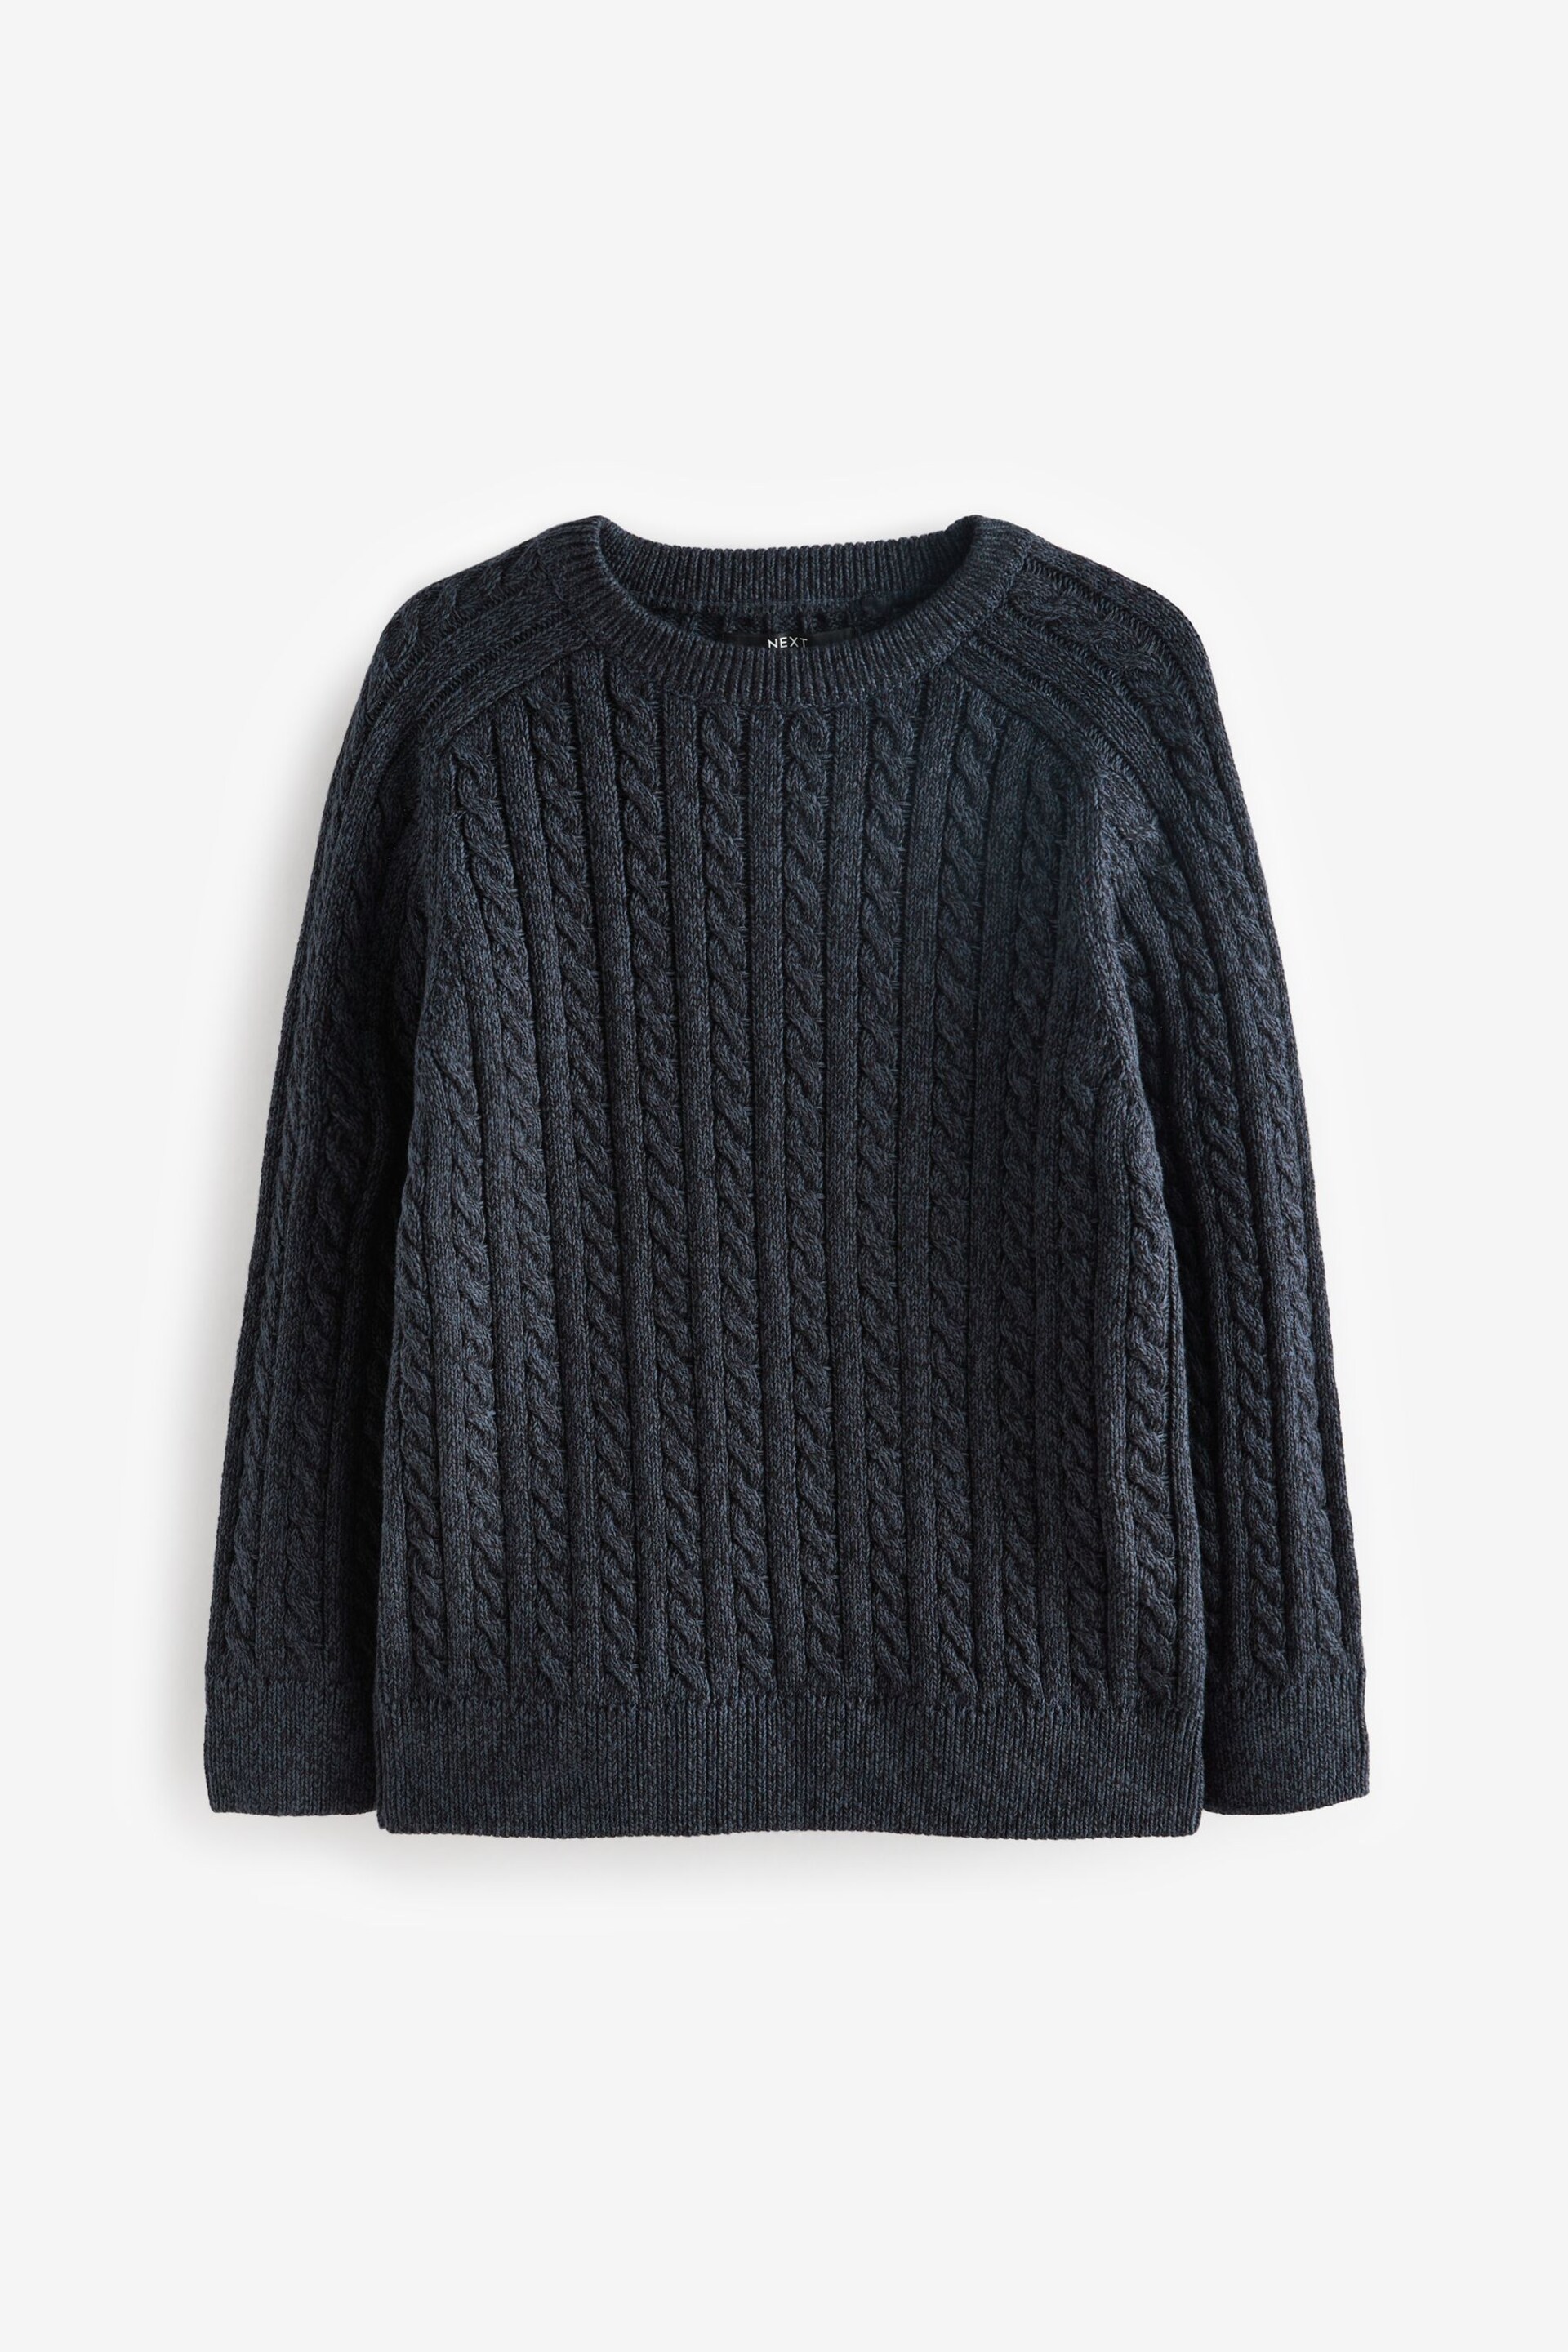 Navy Blue Cable Knit Crew Jumper (3-16yrs) - Image 1 of 3